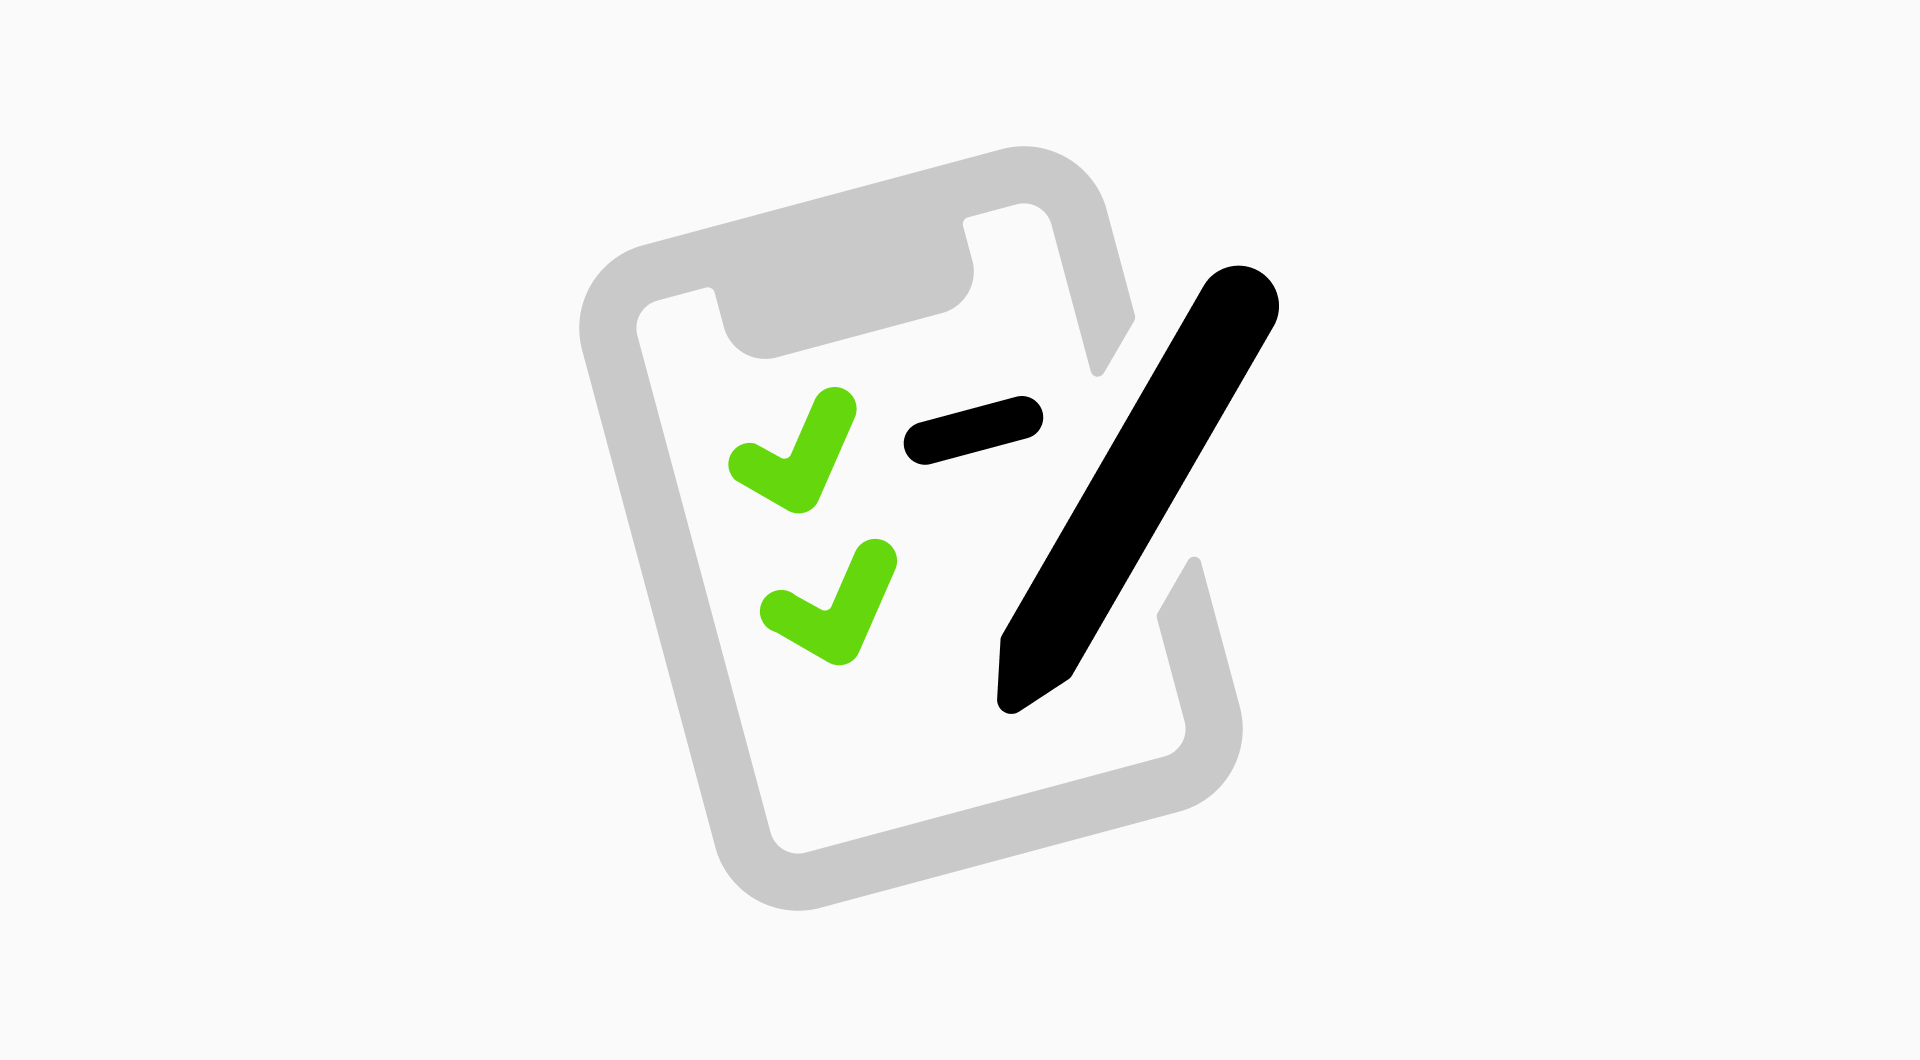 Plan-icon-design-project.png